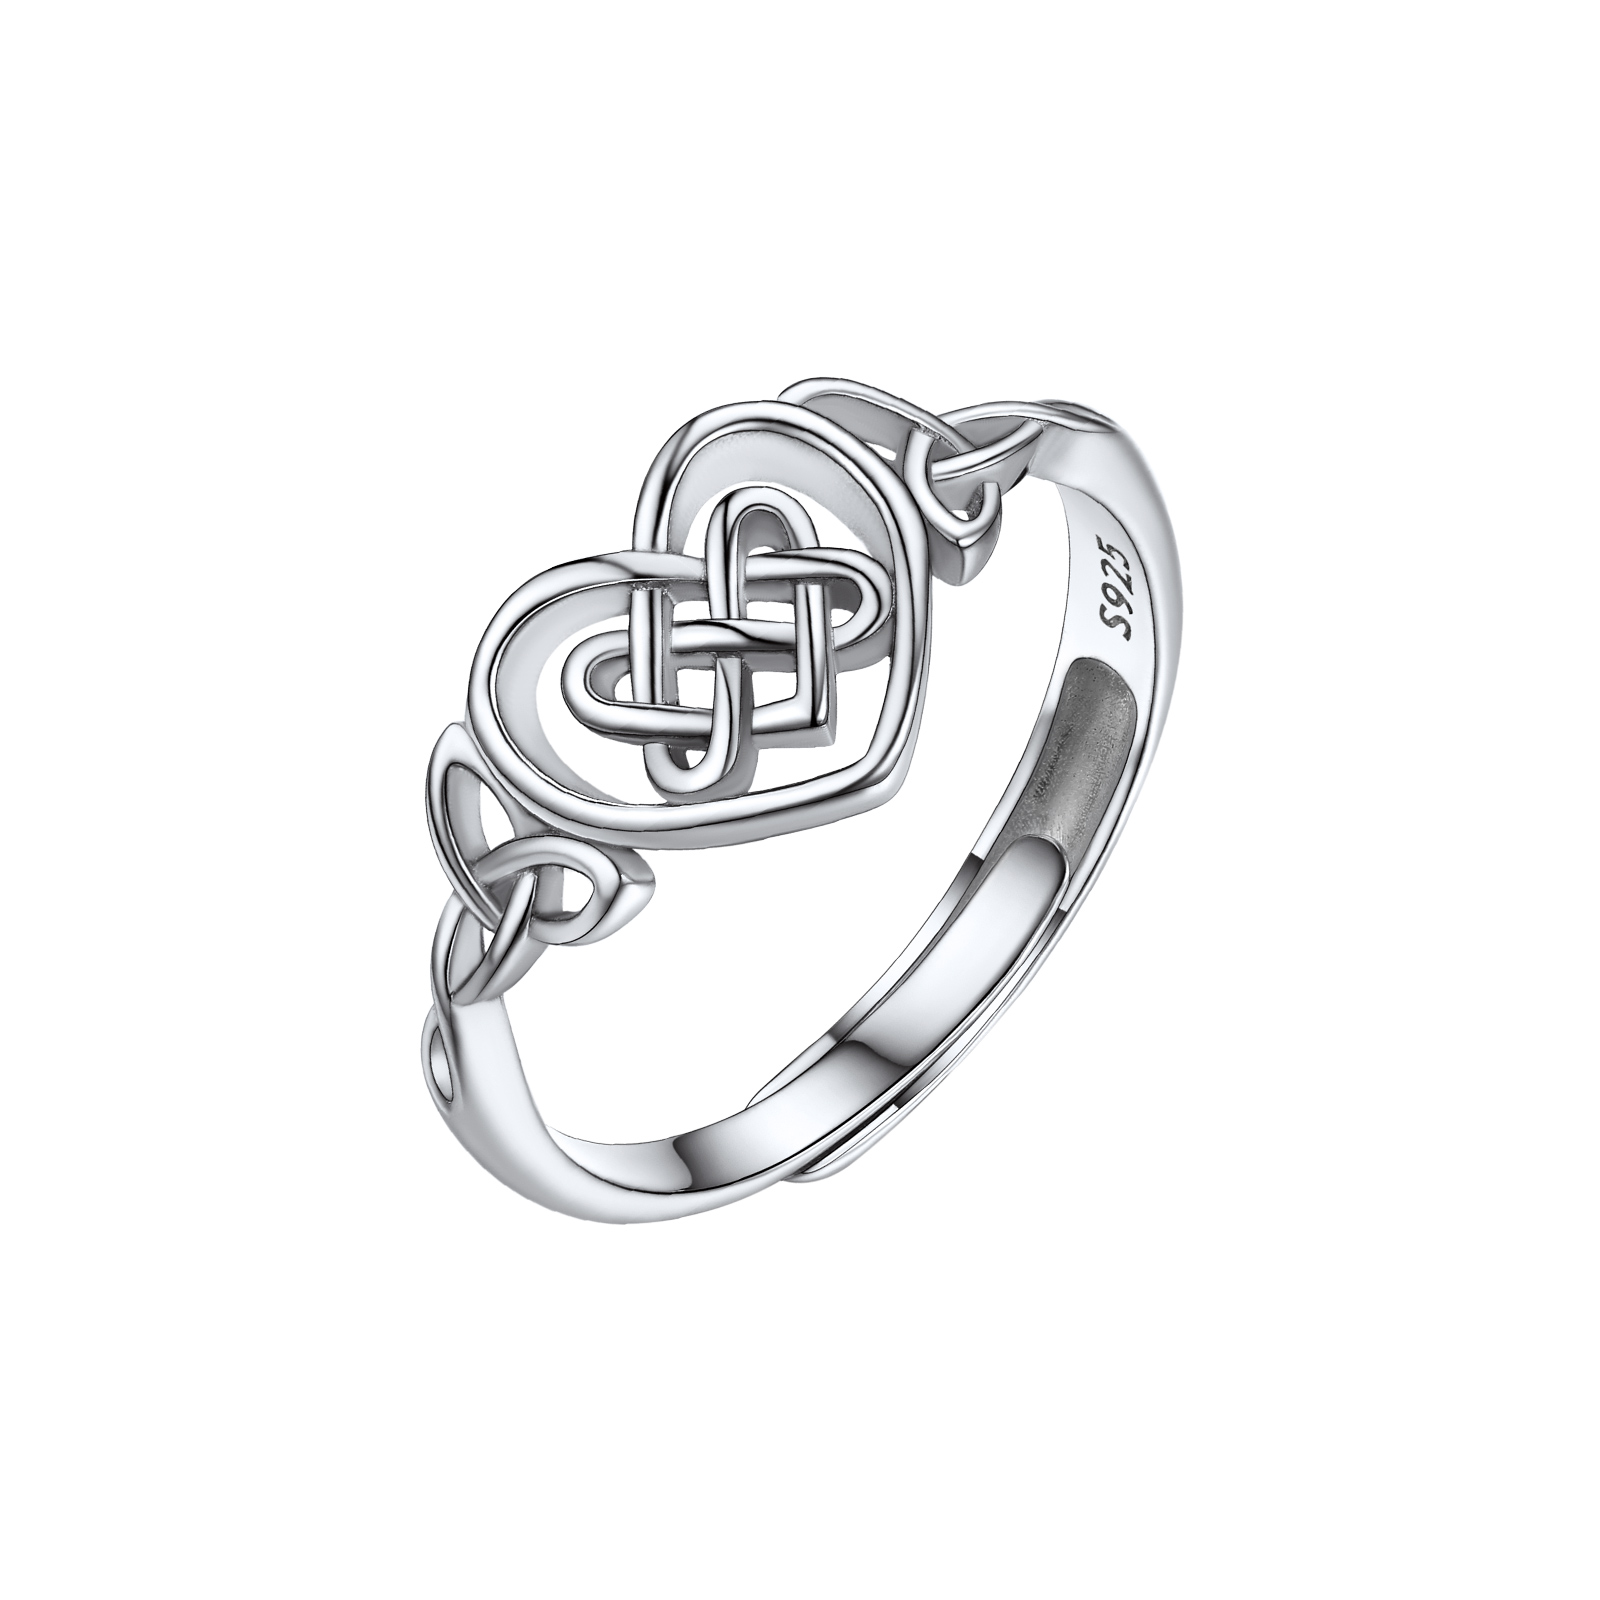 ChicSilver 925 Sterling Silver Celtic Knot Heart Ring